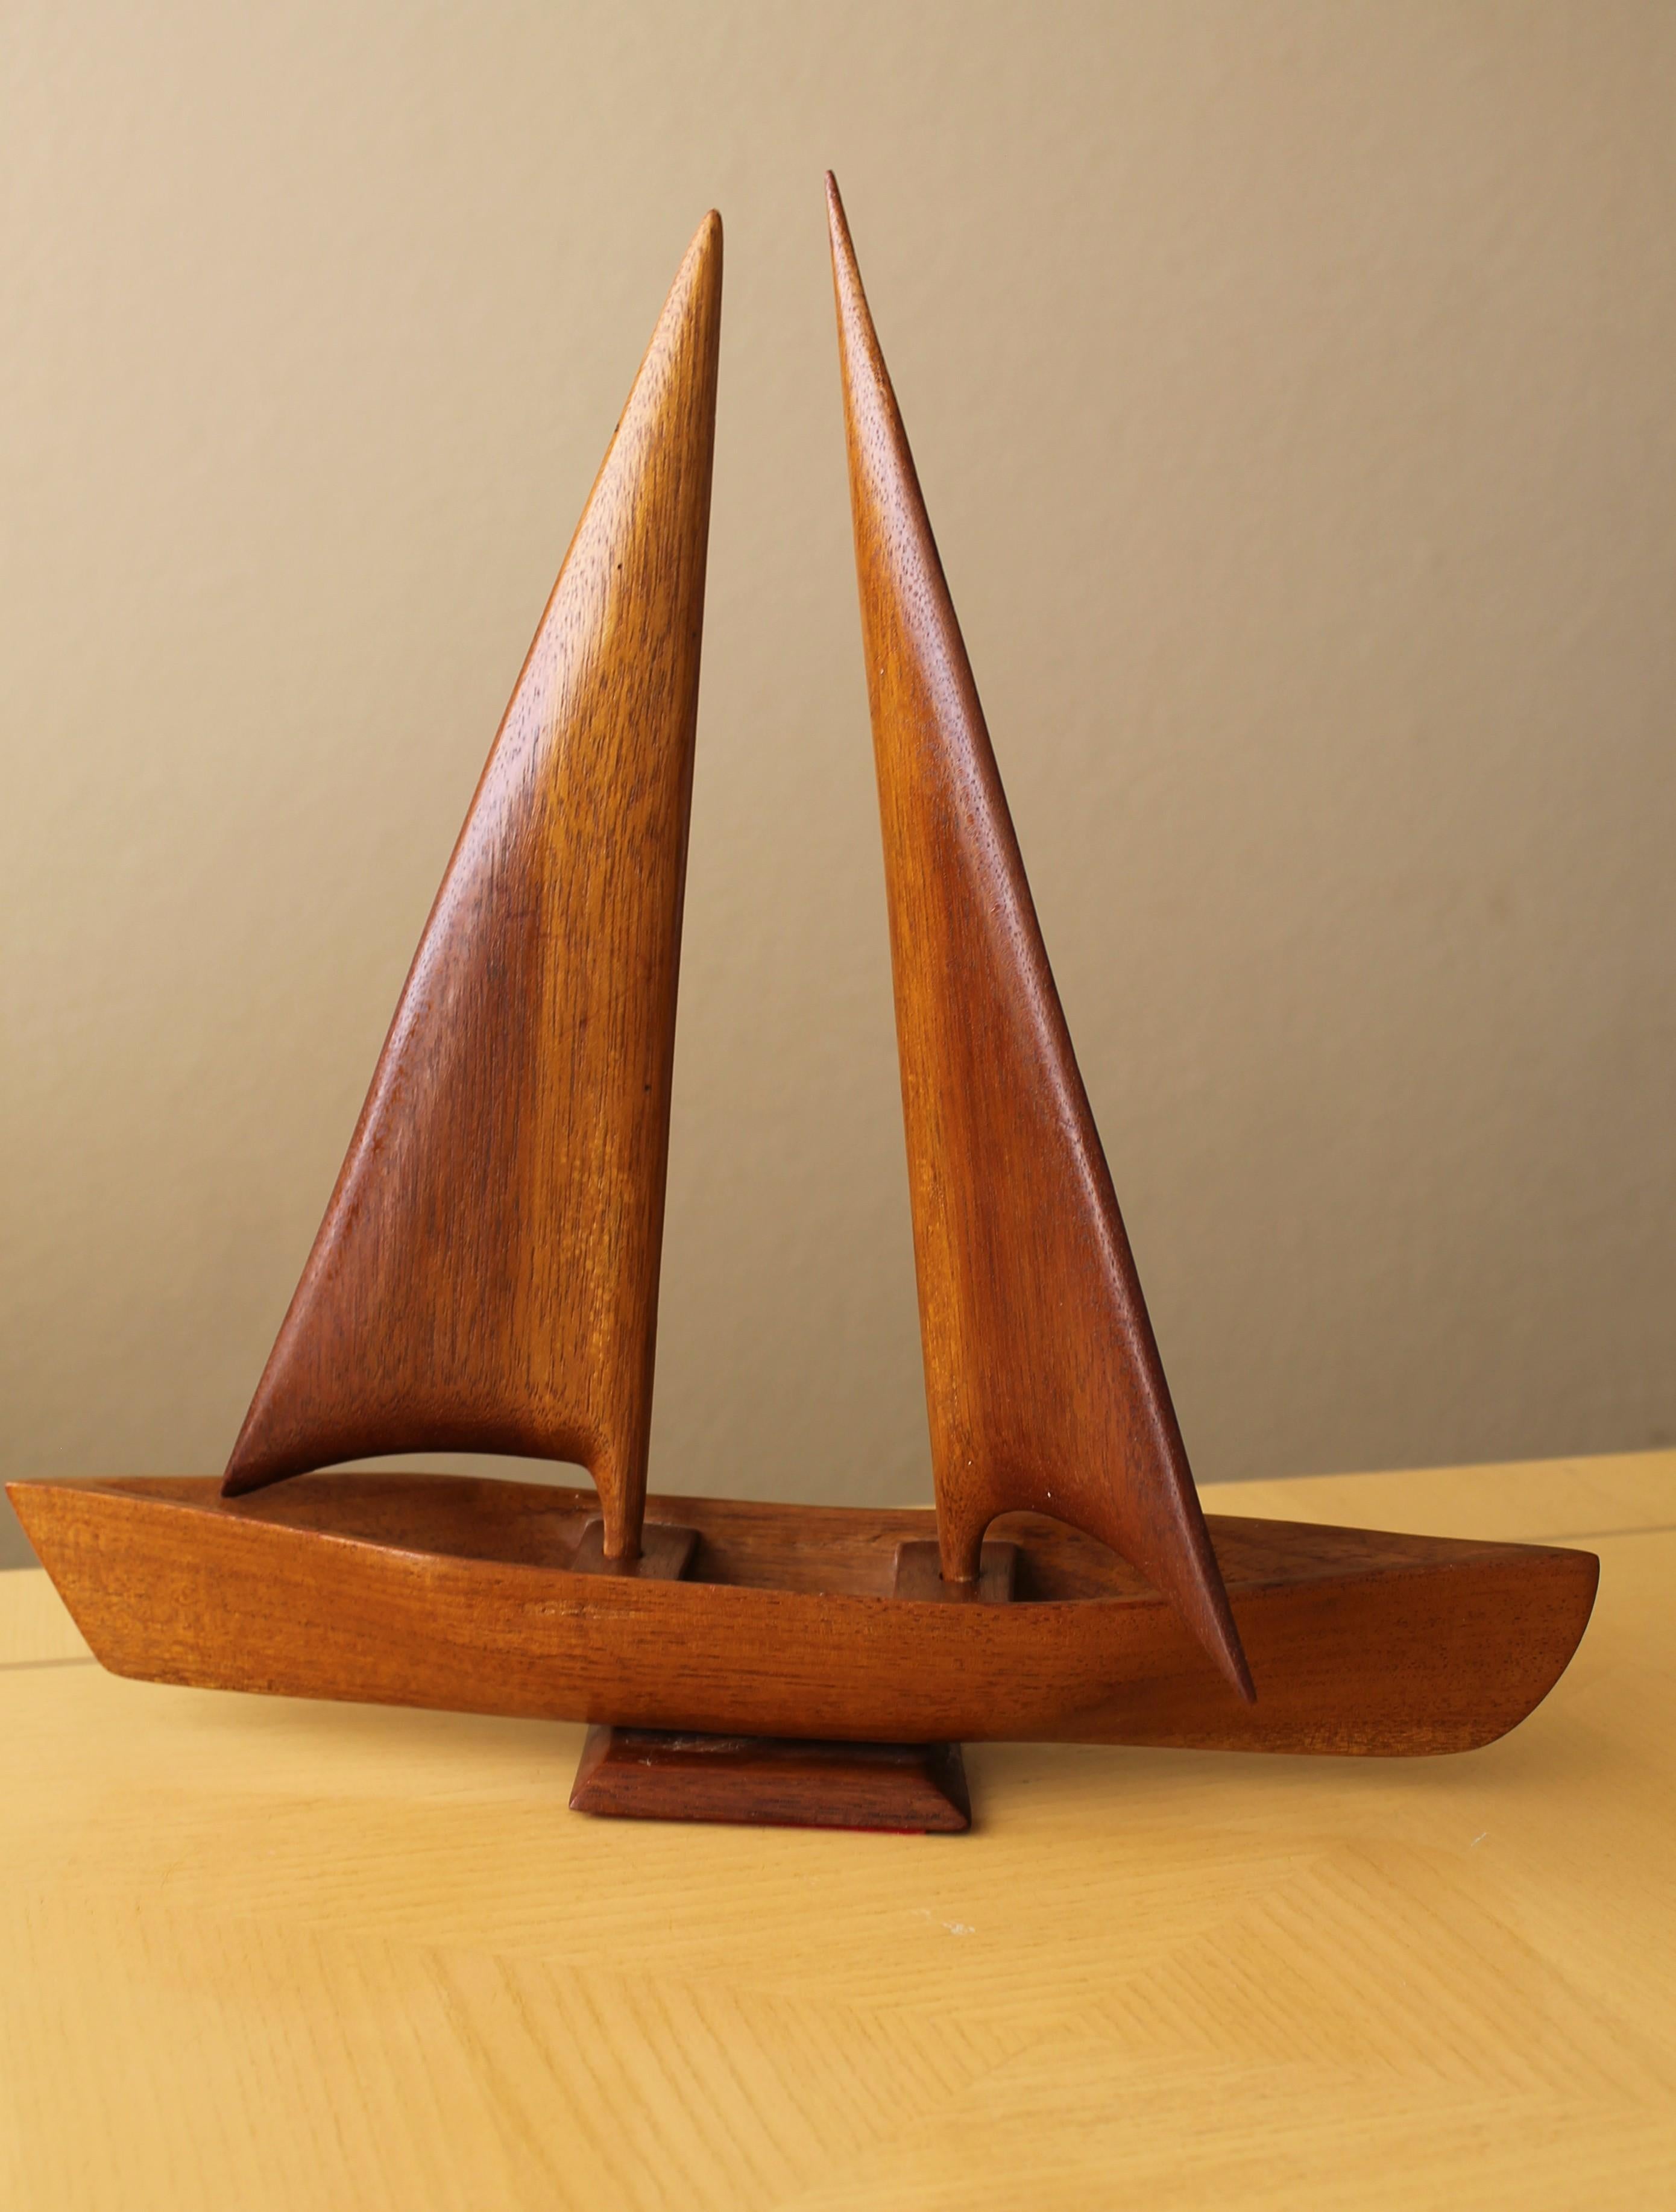 Gorgeous Mid Century Danish Styled Teak Sailboat Sculpture 1960 In Good Condition For Sale In Peoria, AZ